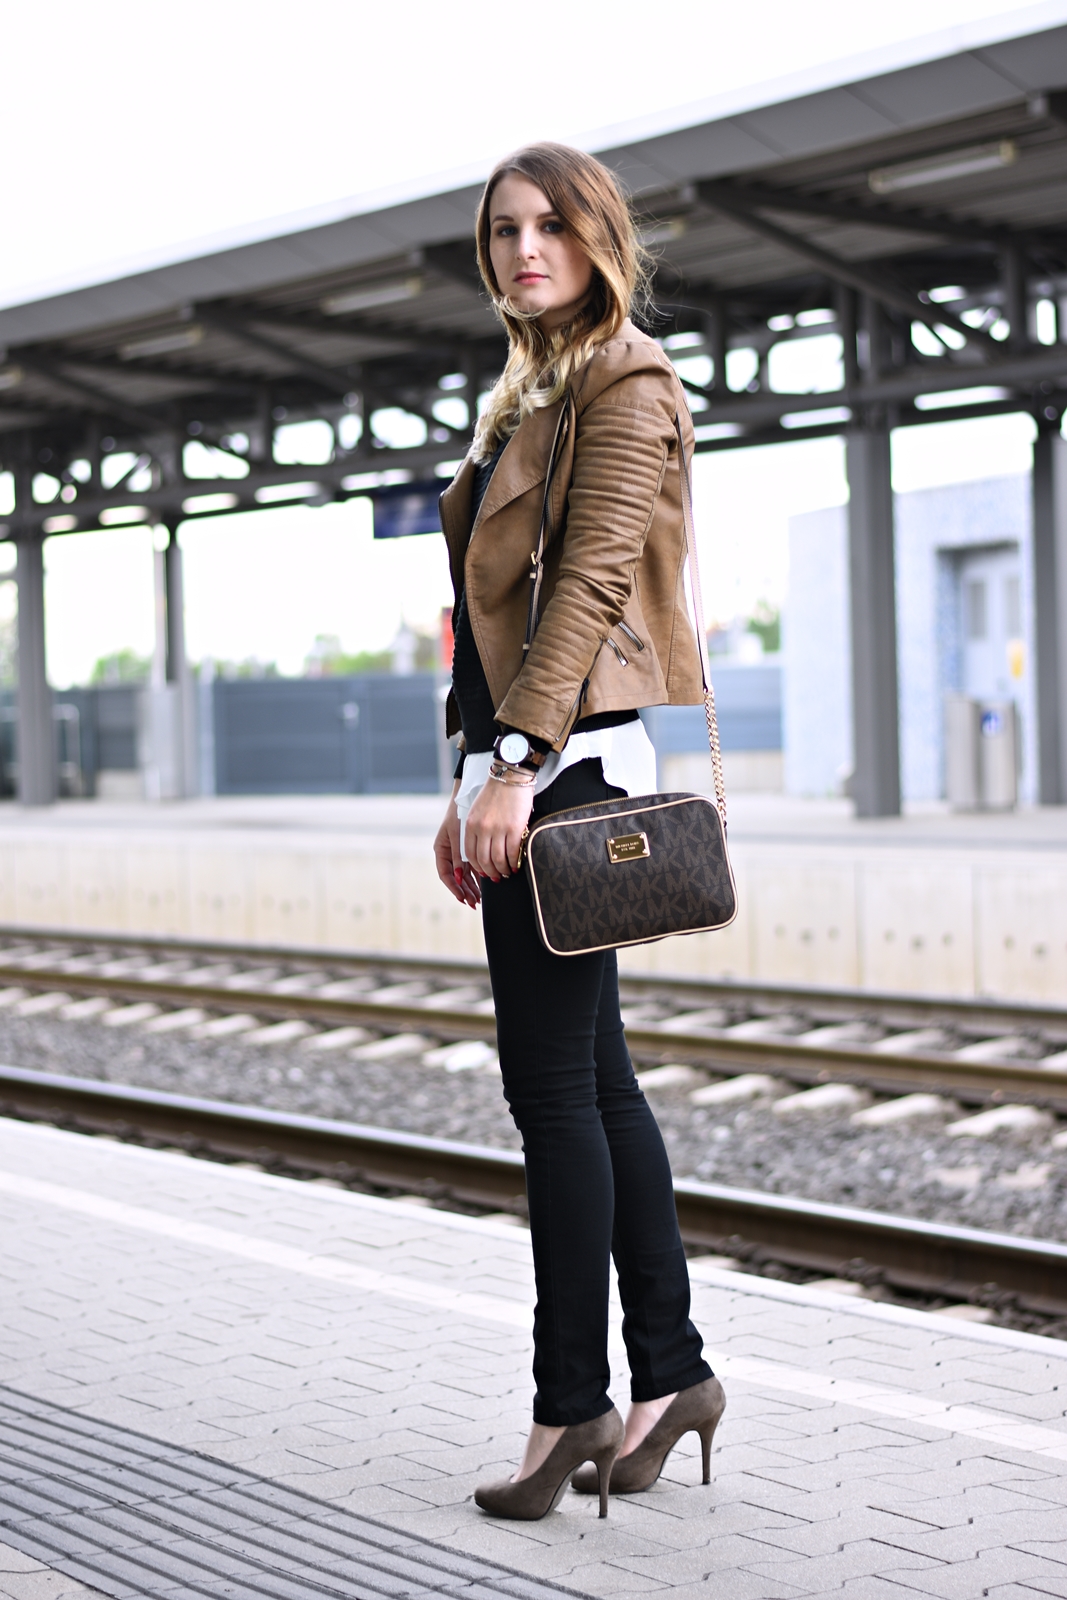 Outfit - Black and Brown - LIVEALIFE Holzuhr - Michael Kors Tasche - Fashionladyloves